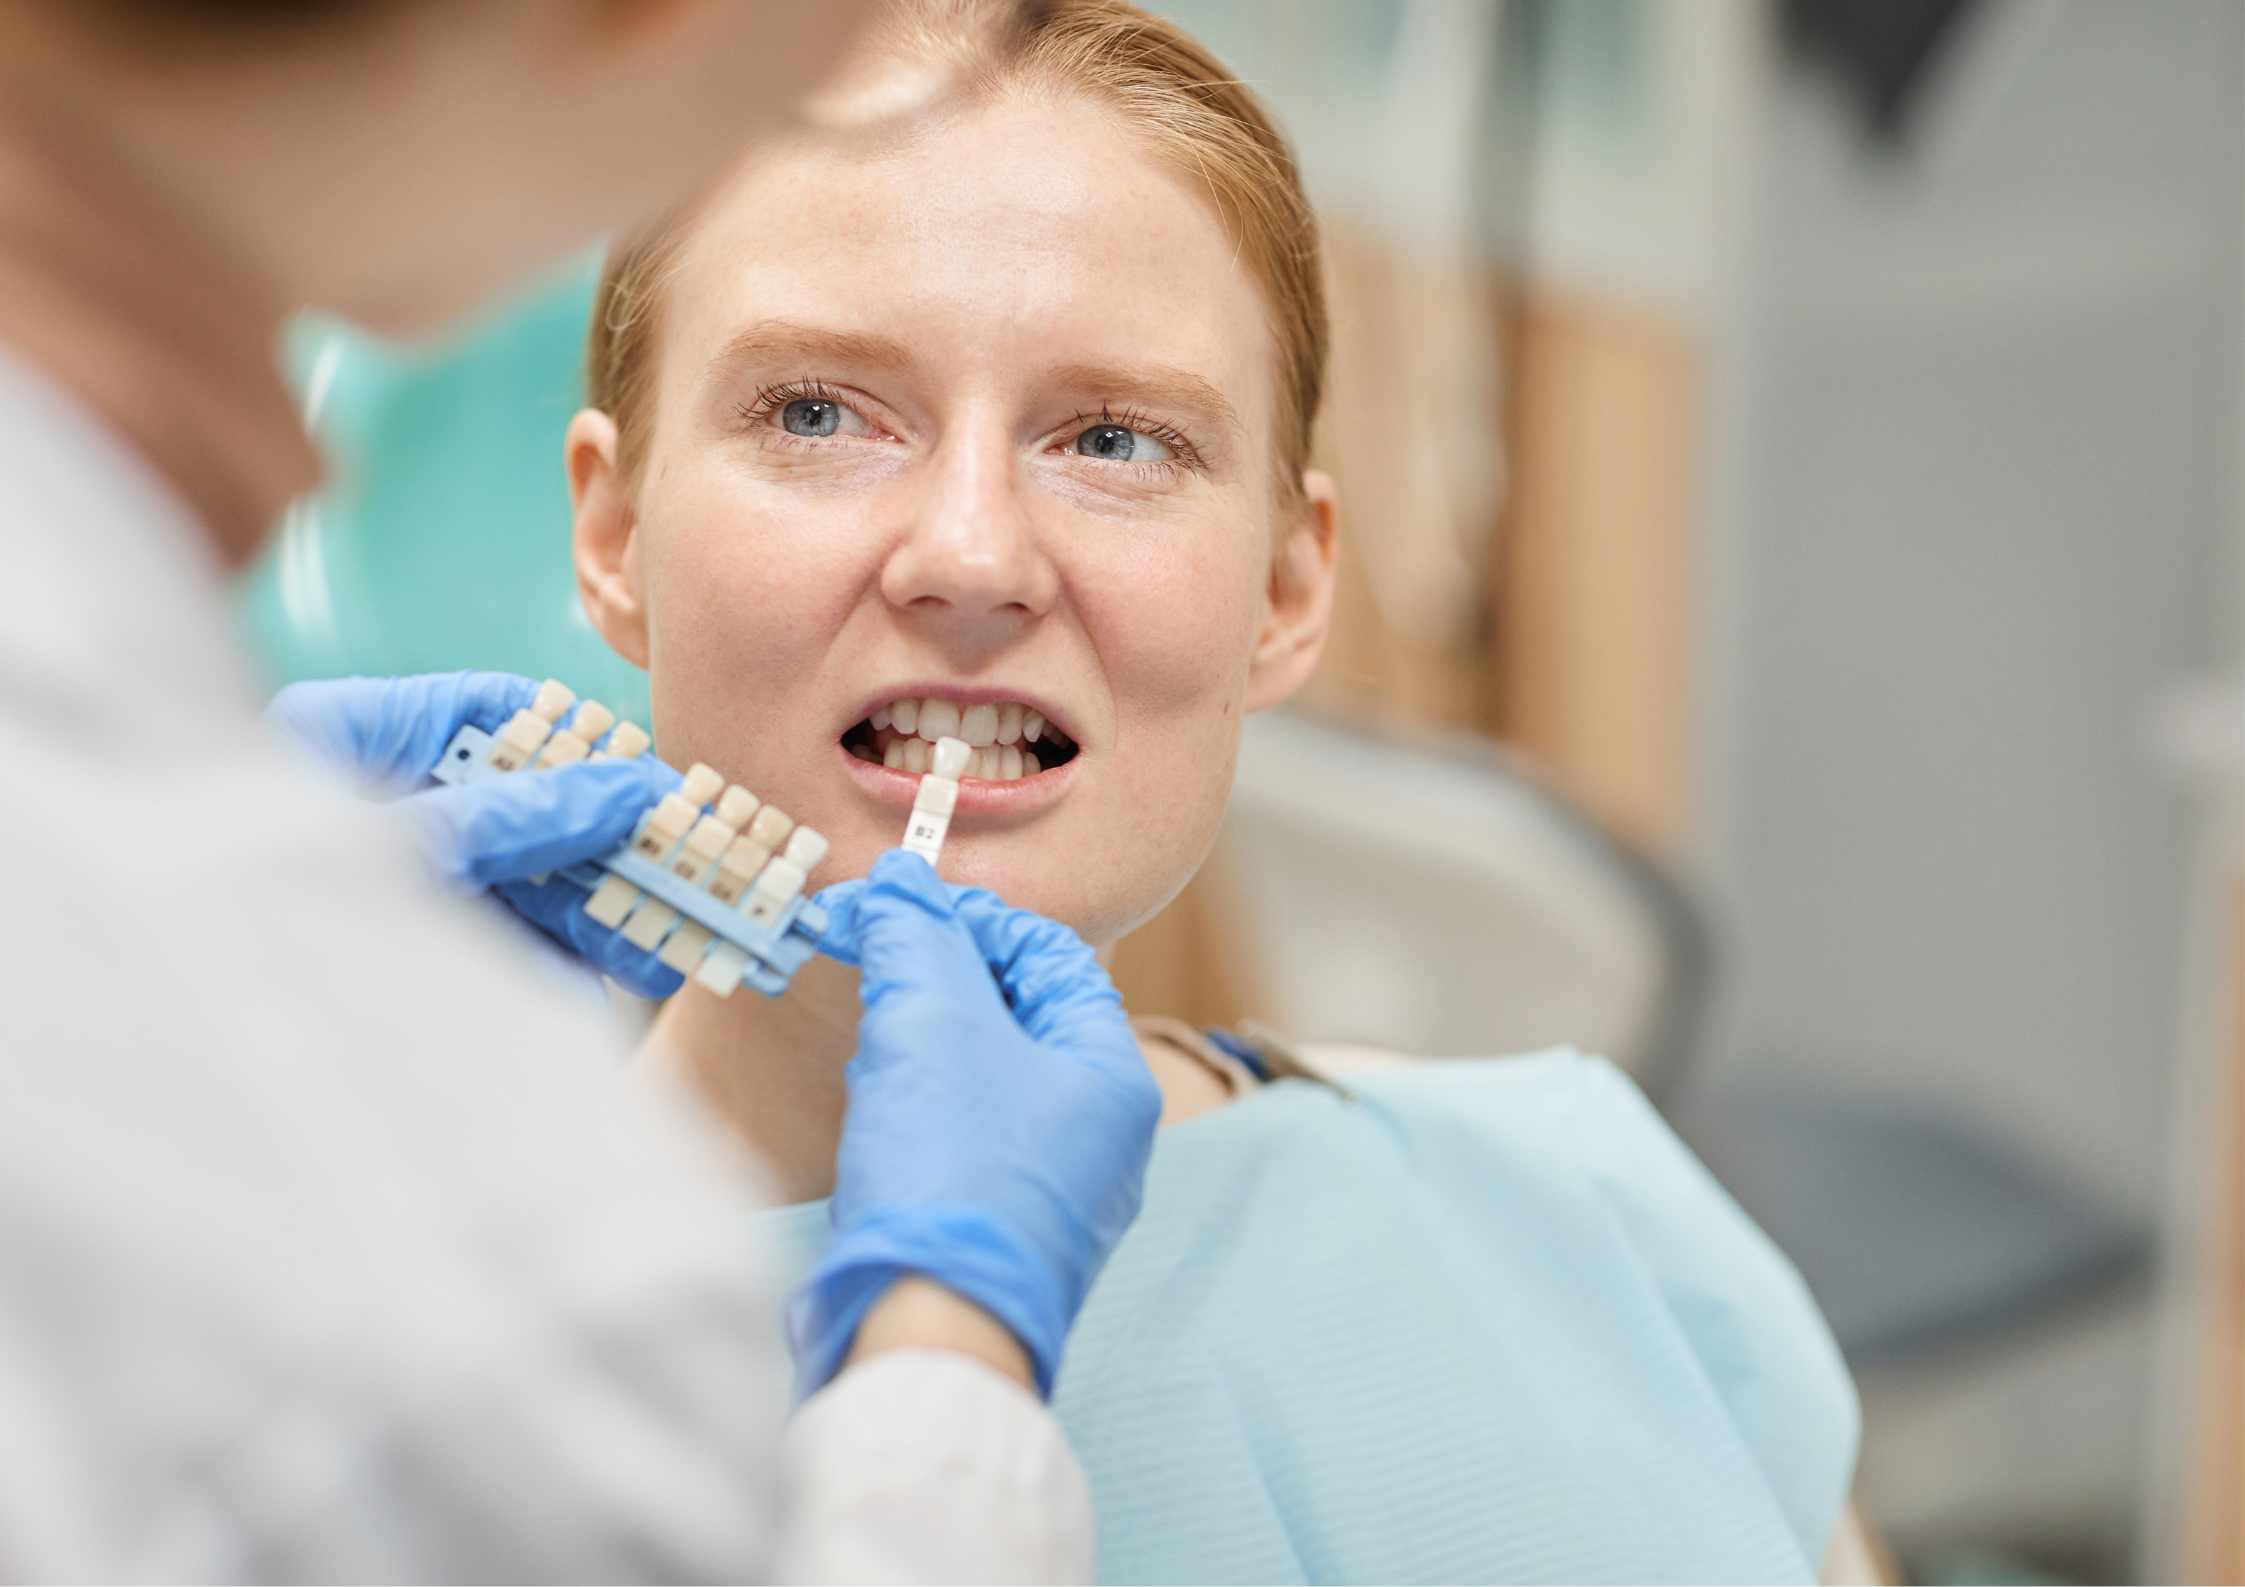 What Are Capped Teeth And How To Care For Them?